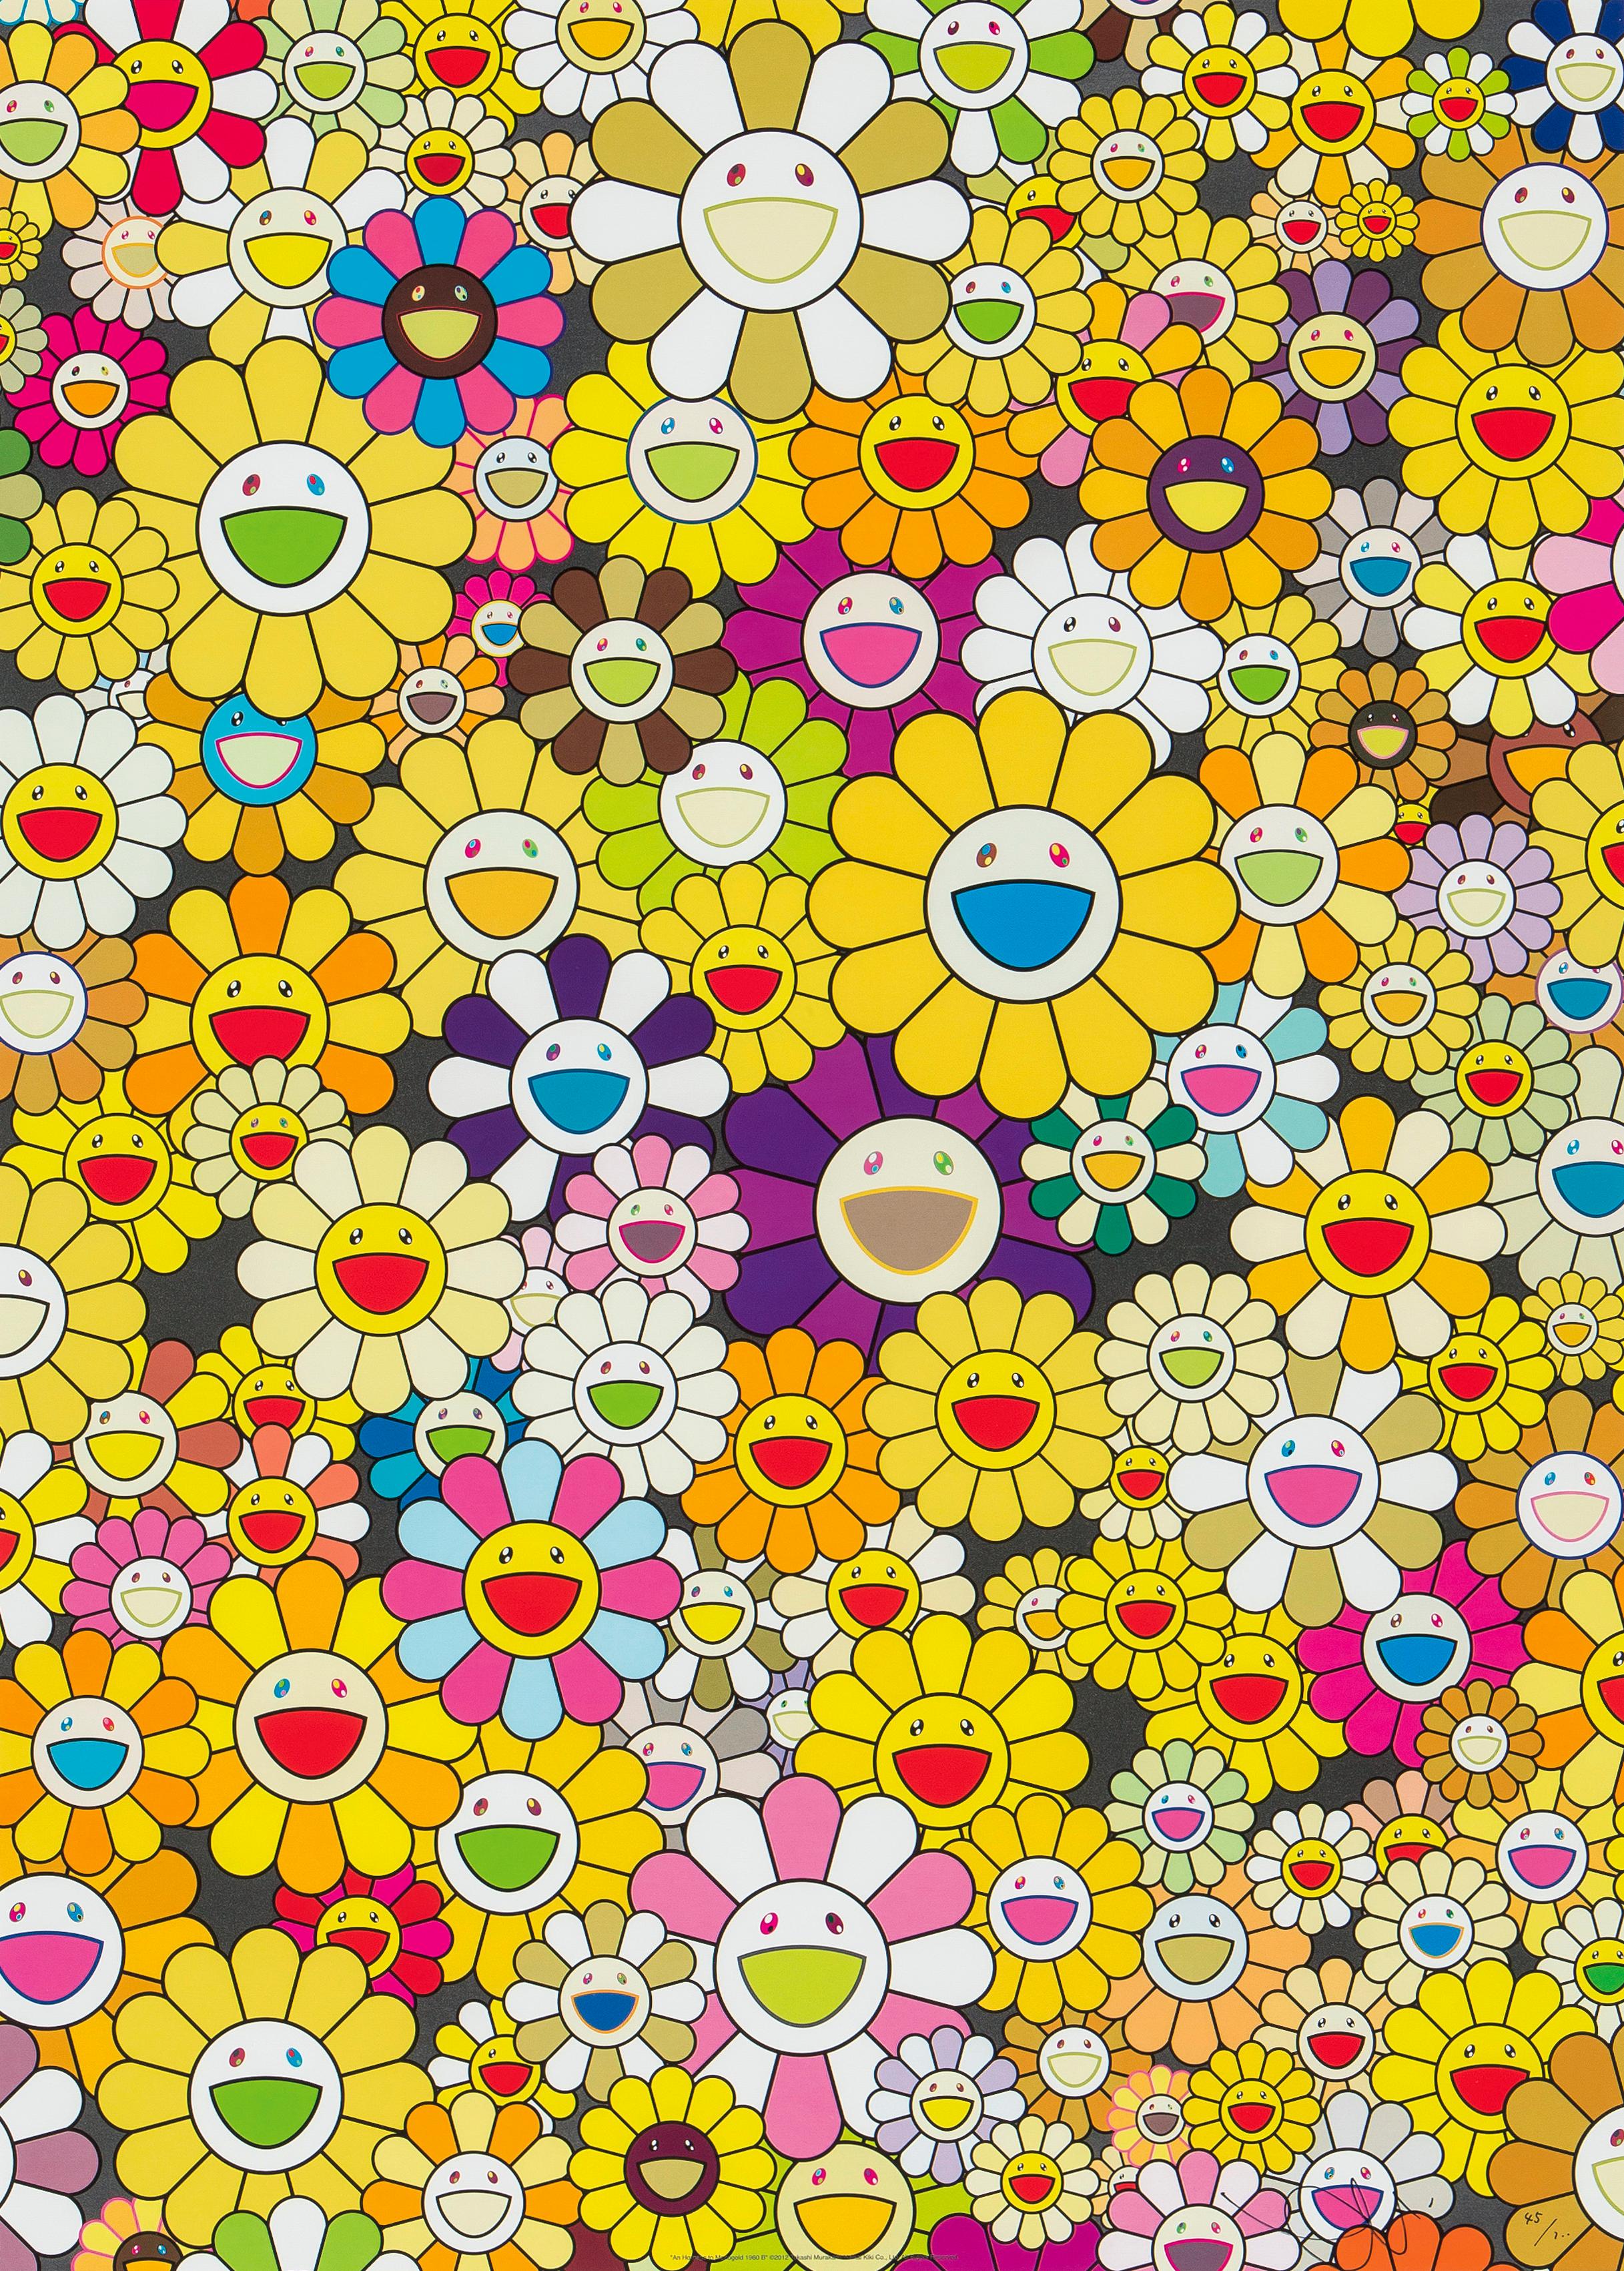 An Homage to IKB, 1957E. Limited Edition (print) by Takashi Murakami signed 1